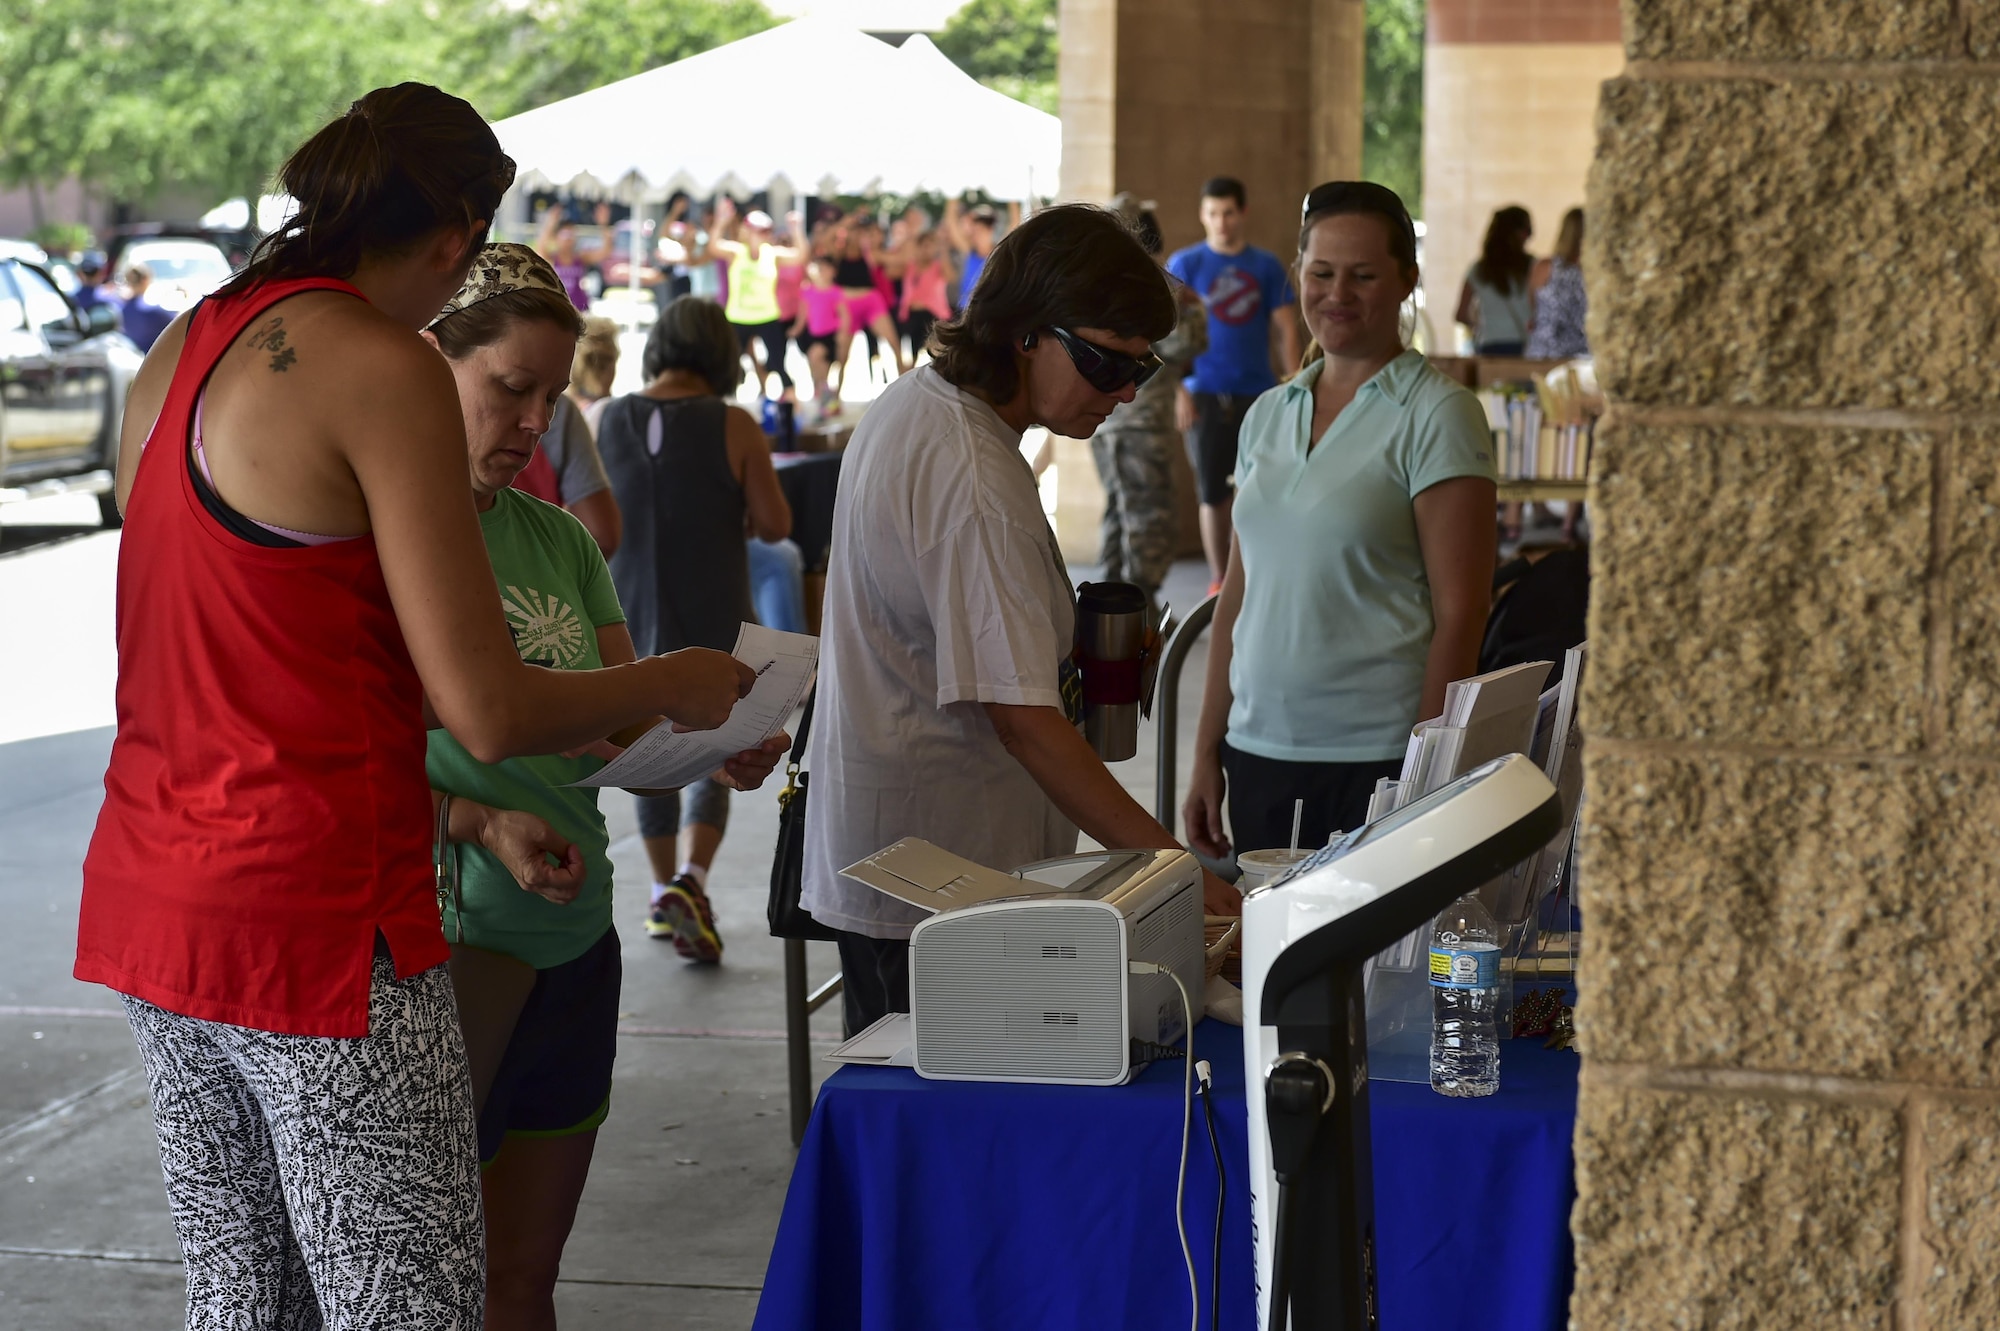 Health and Wellness Center representatives’ discuss healthy lifestyle choices with shoppers at the 2nd Annual Healthy Lifestyle Festival at Hurlburt Field, Fla., July 8, 2016. The festival was an opportunity for Airmen and their families to be educated on the importance of healthy lifestyle choices. (U.S. Air Force photo by Senior Airman Jeff Parkinson)